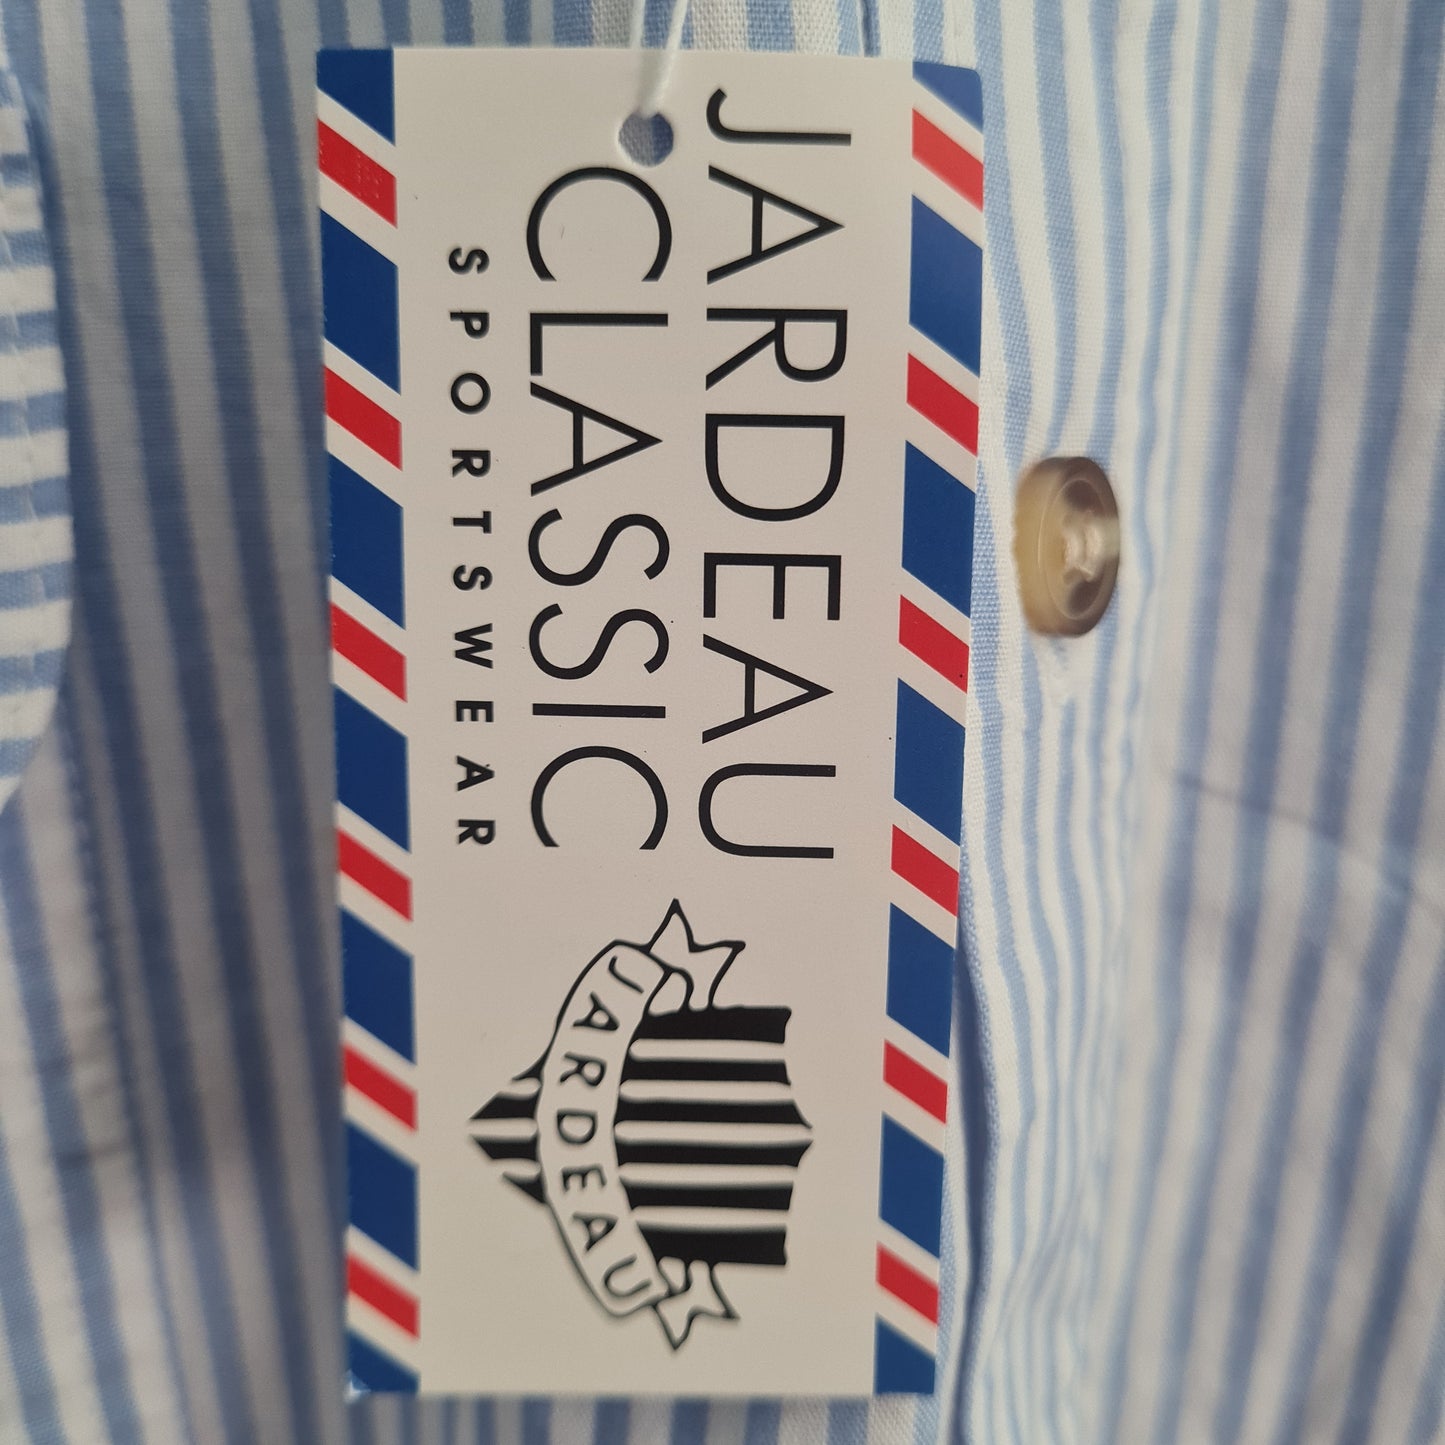 Jardeau Classic Collared Blue white striped Shirt Size XL